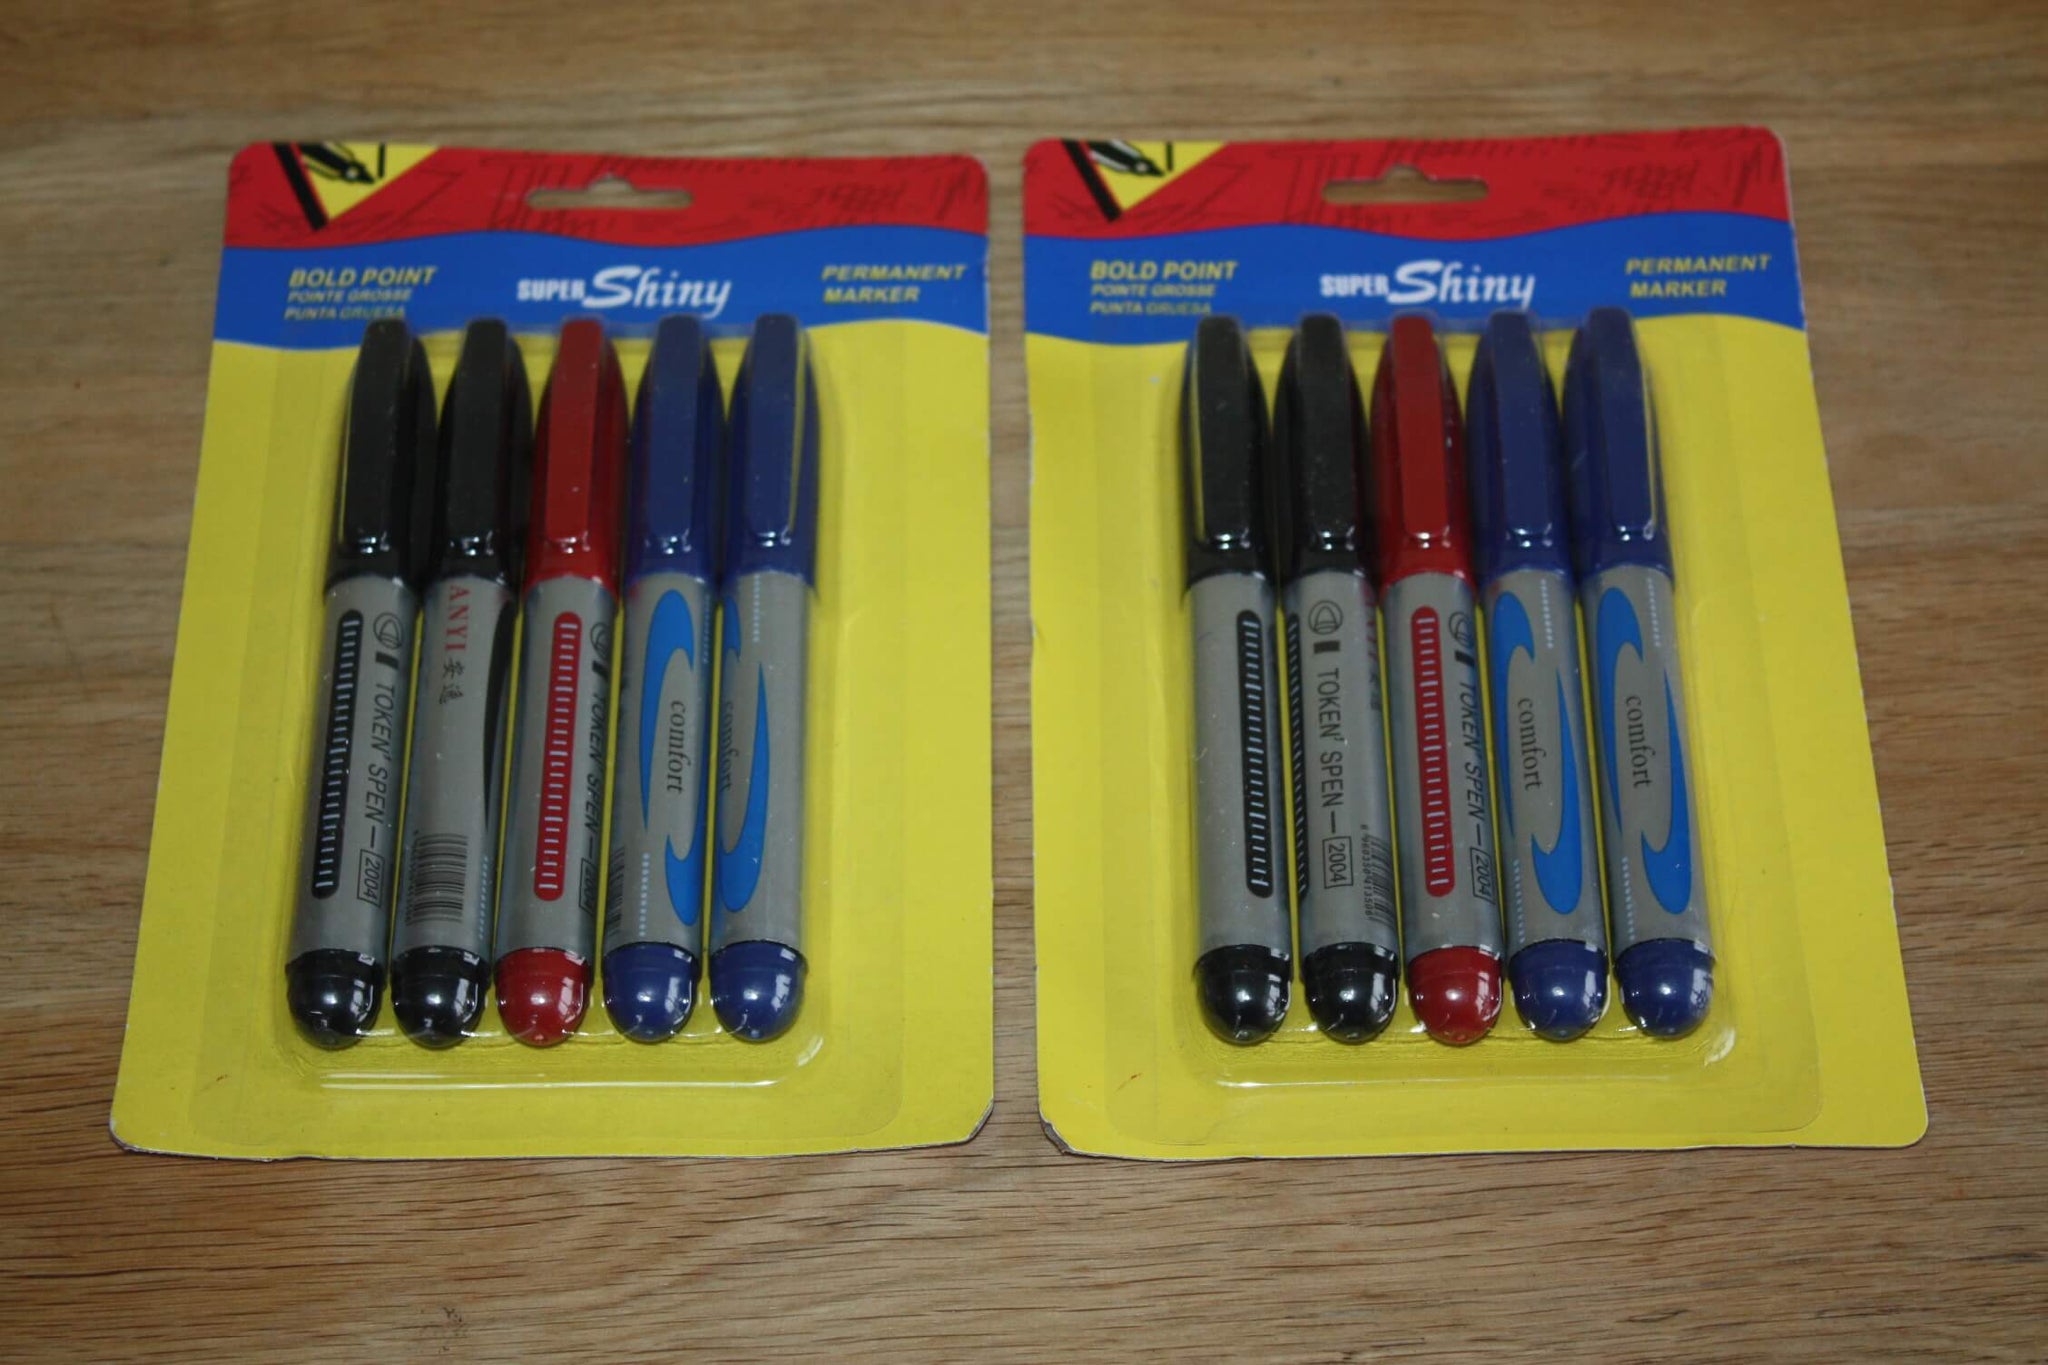 Set of 10 indelible permanent markers - Large tip - Black Blue and Red